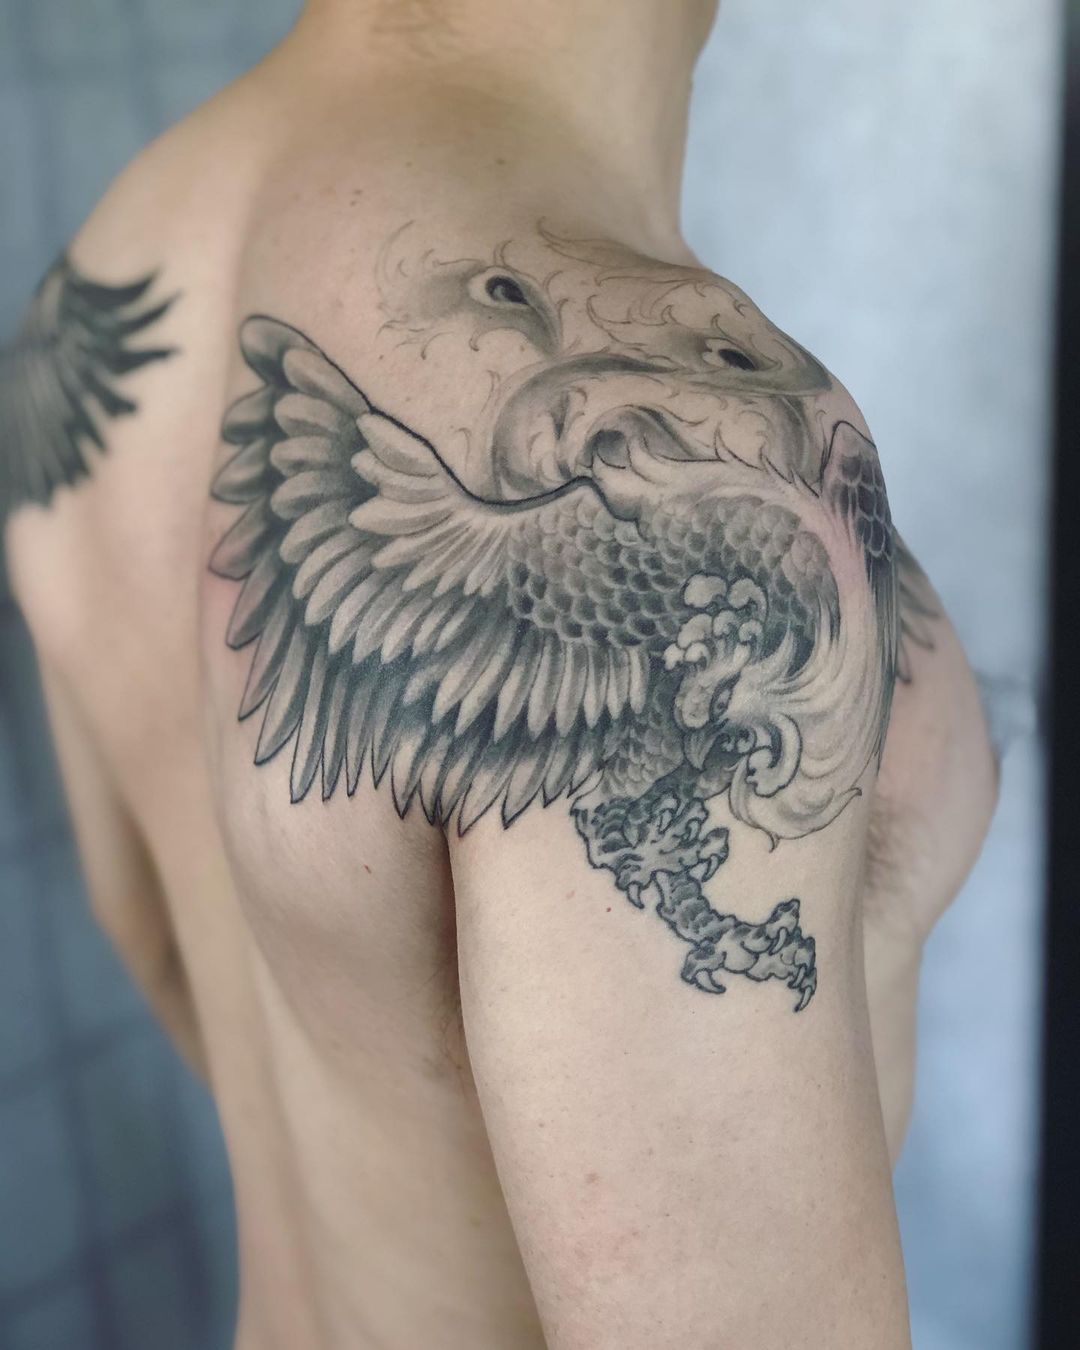 Phoenix Tattoo With Scary Eyes